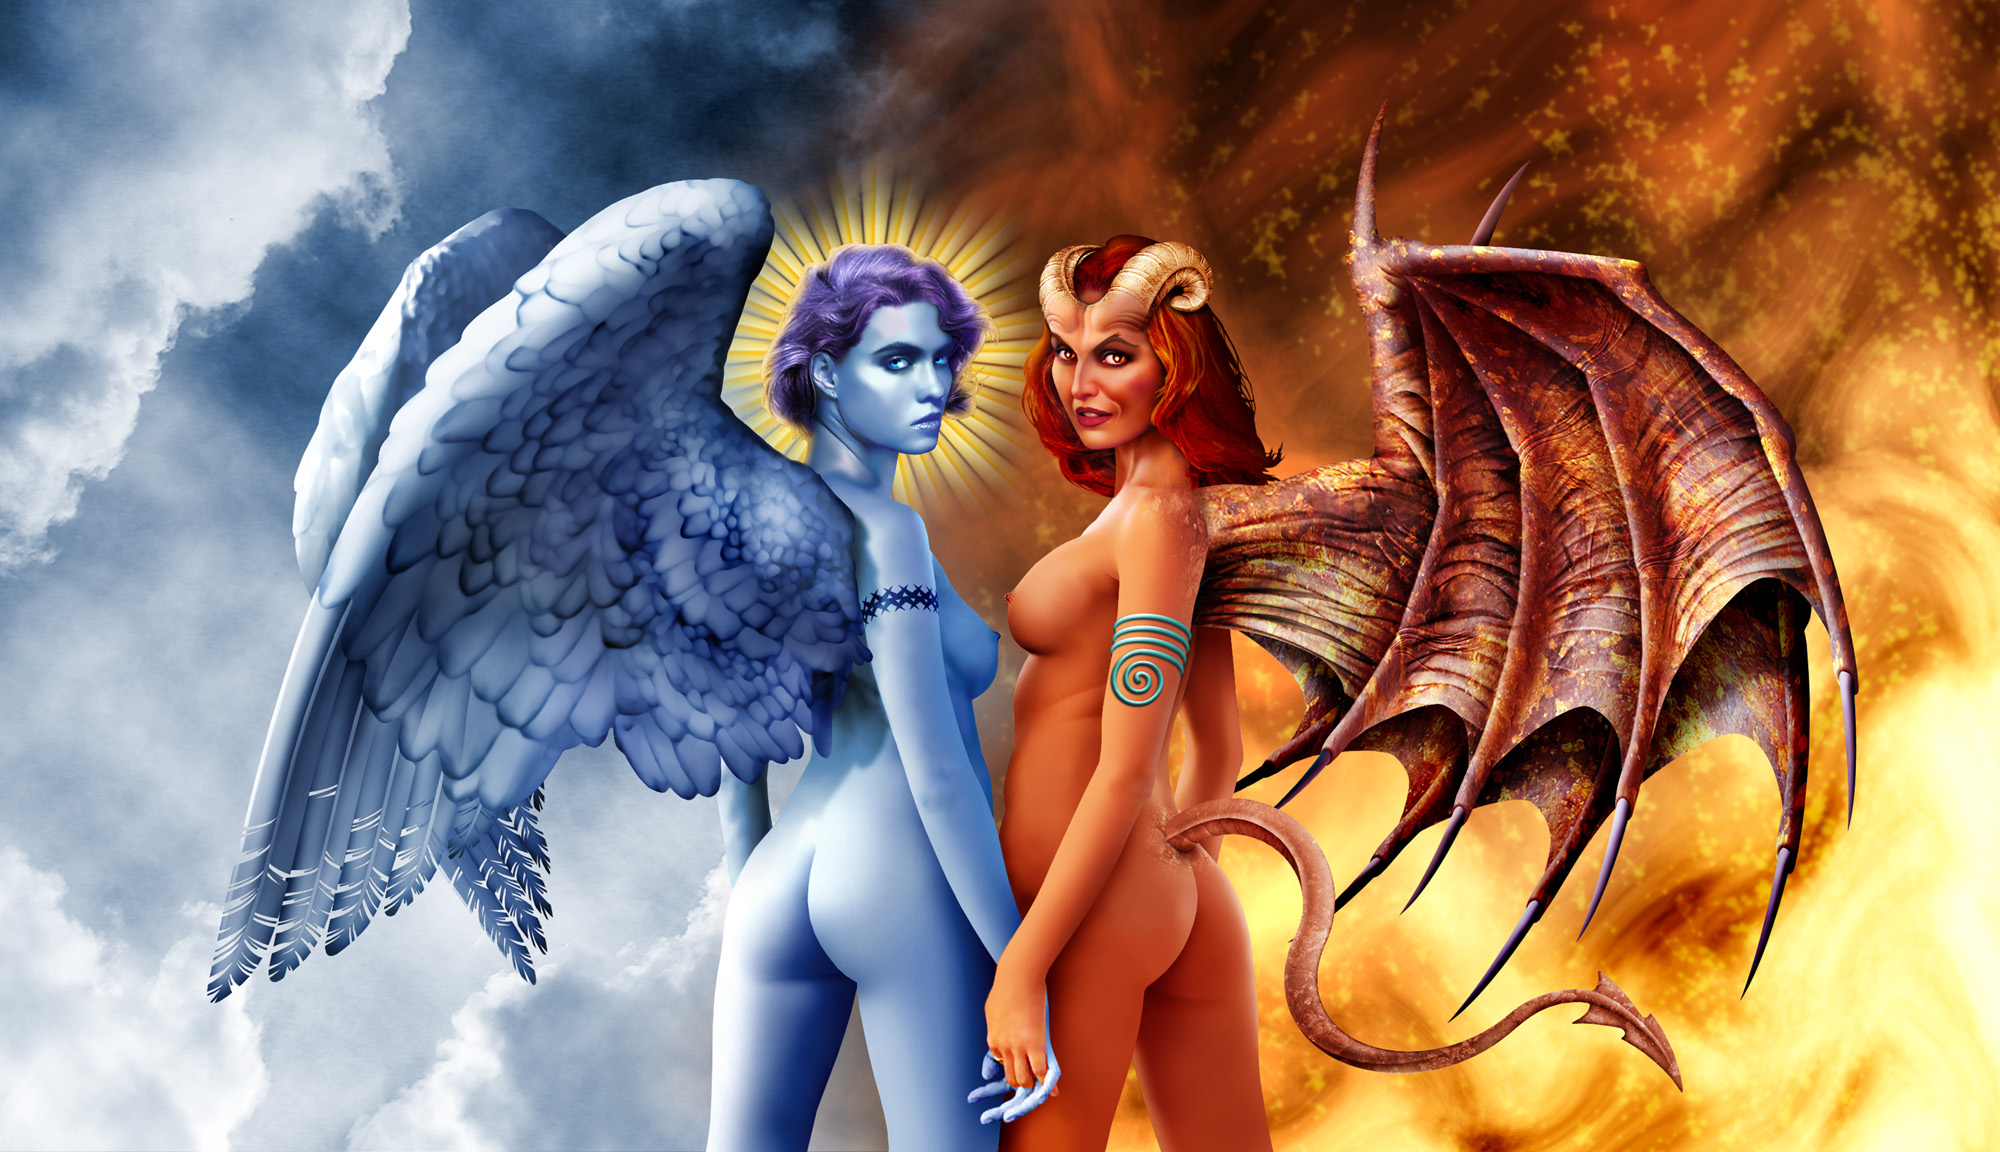 angel and devil